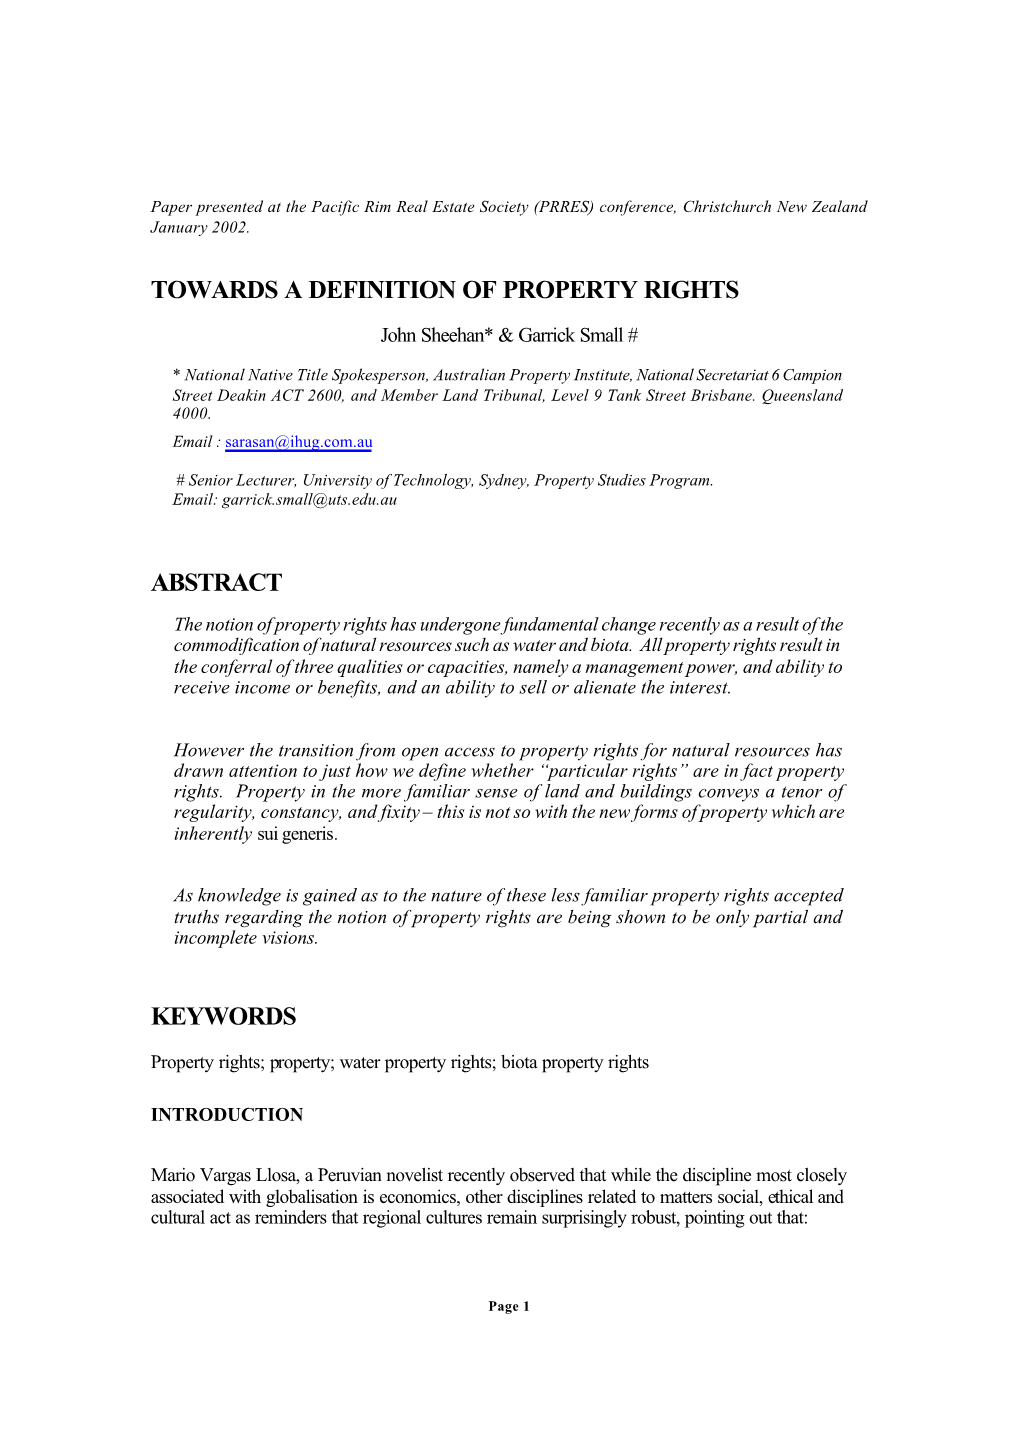 A Definition of Property Rights